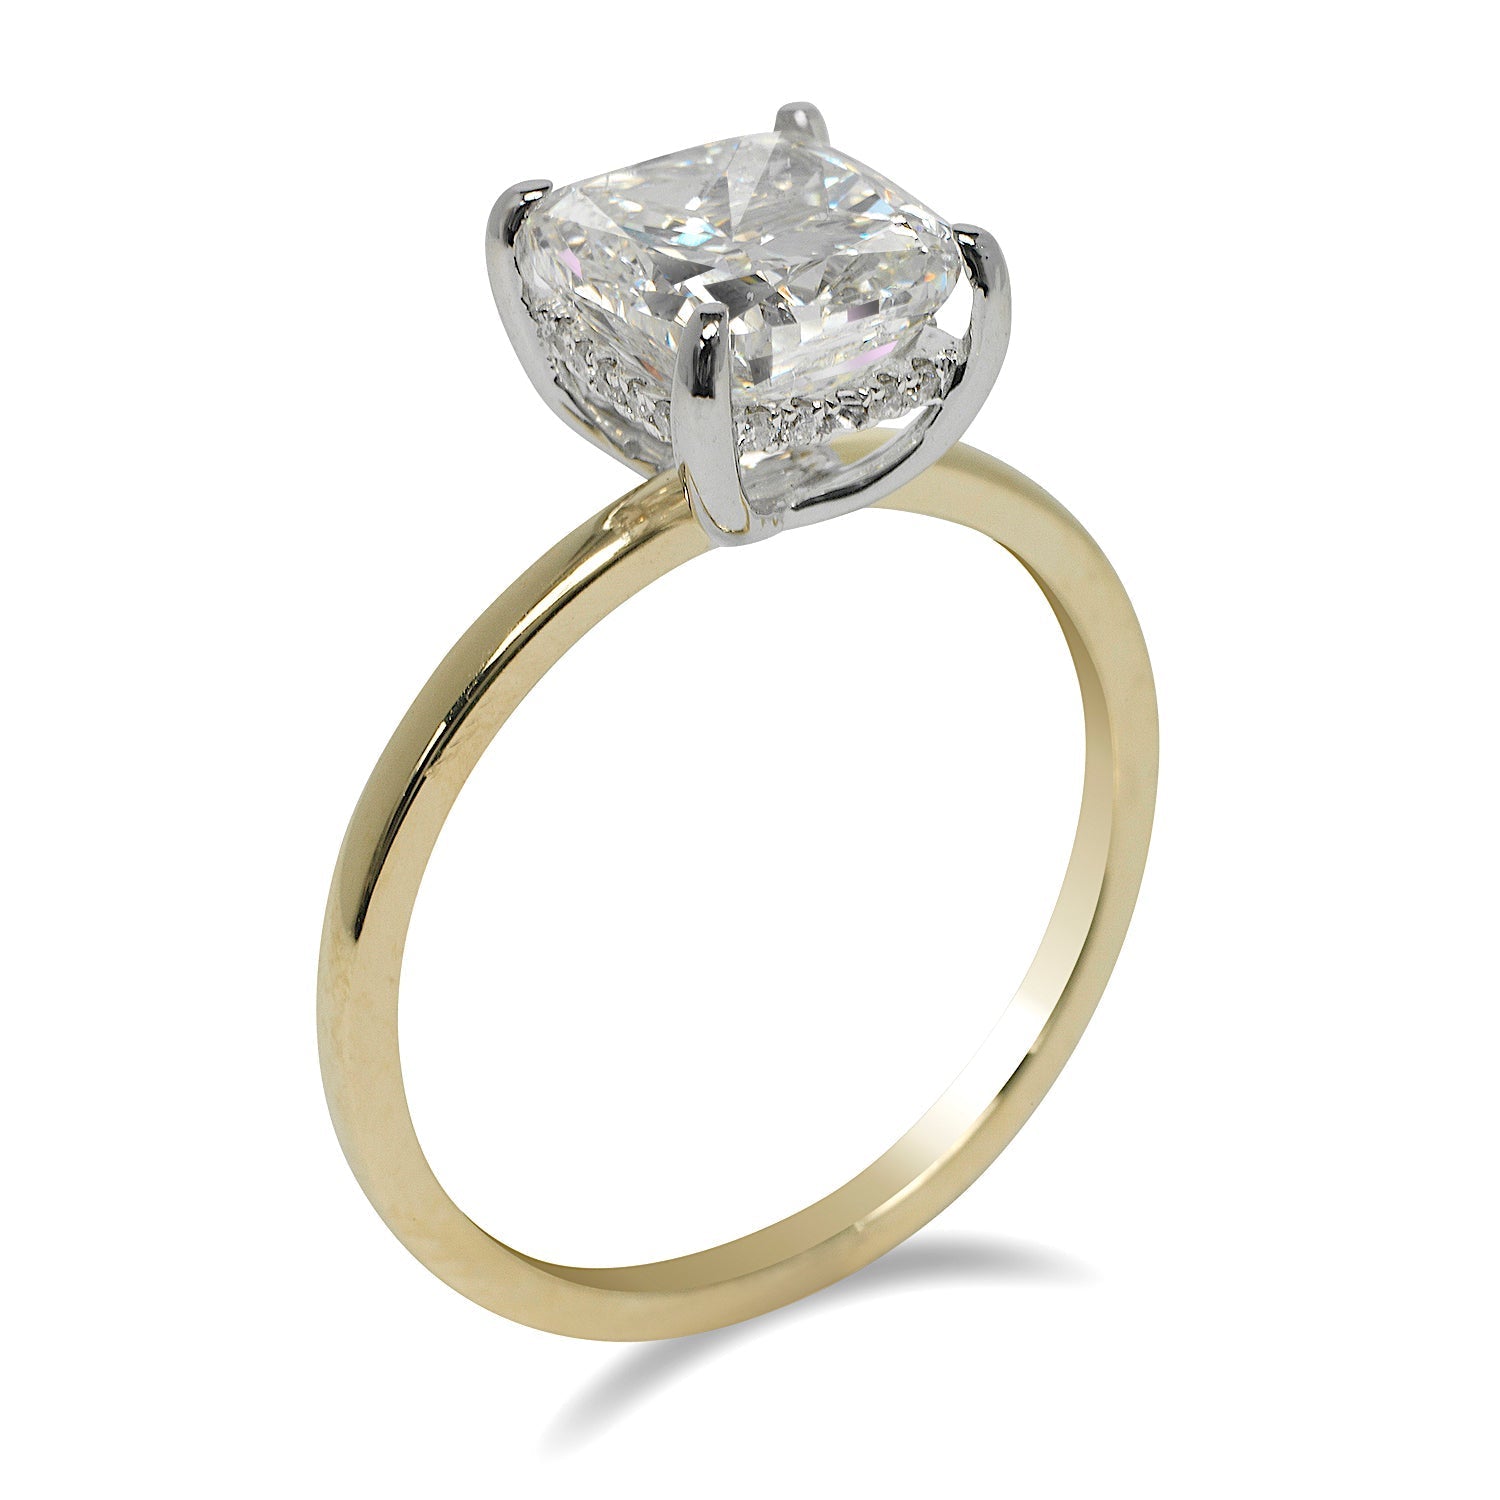 Diamond Ring Cushion Cut 2 Carat Solitaire Ring in 18K Gold Side View